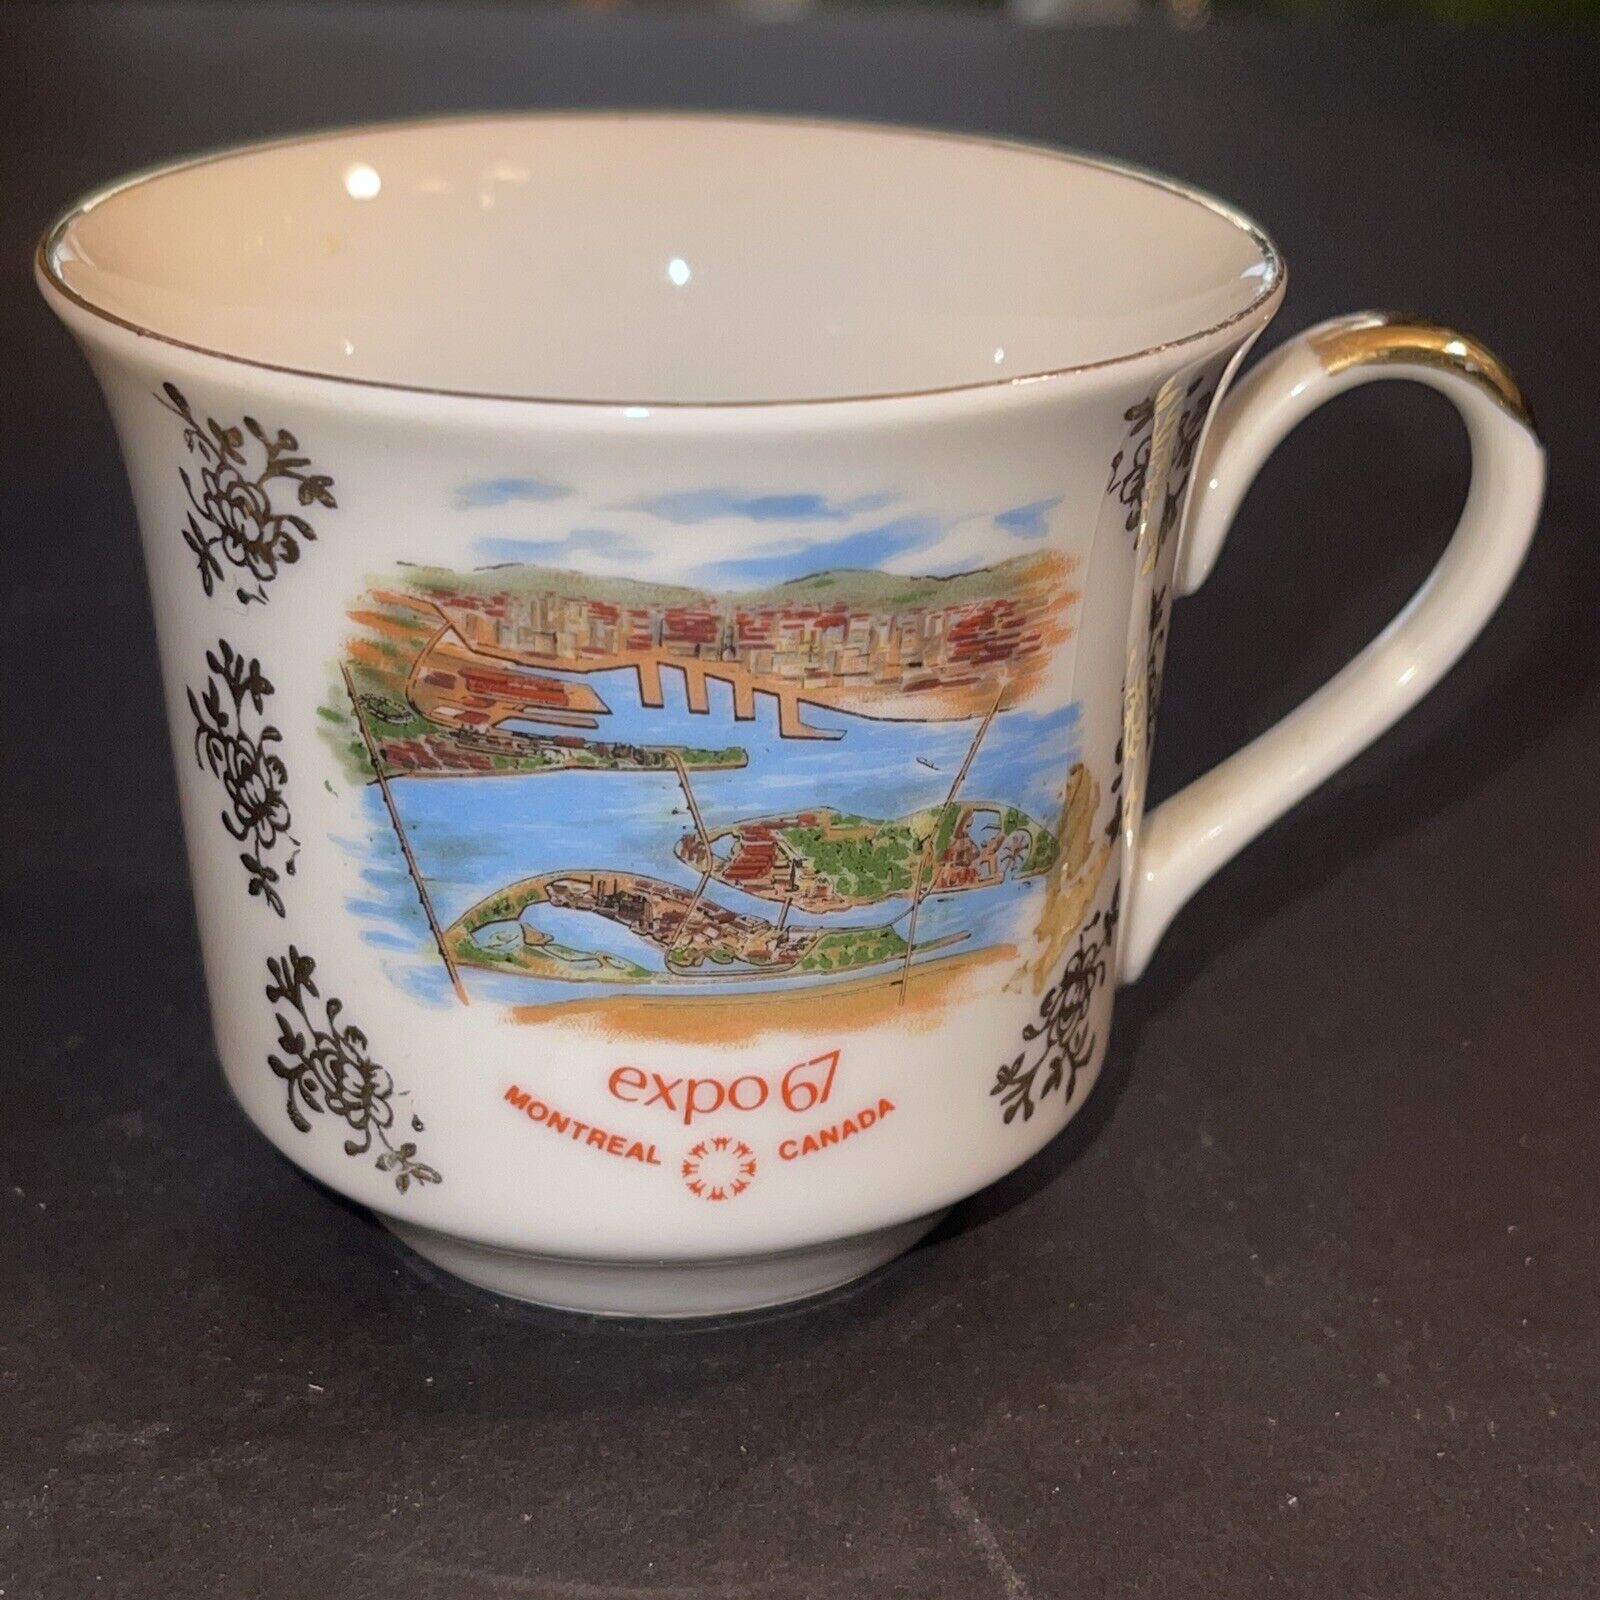 Vintage Expo 67 Commemorative Teacup Montreal Canada, Made In Western Germany